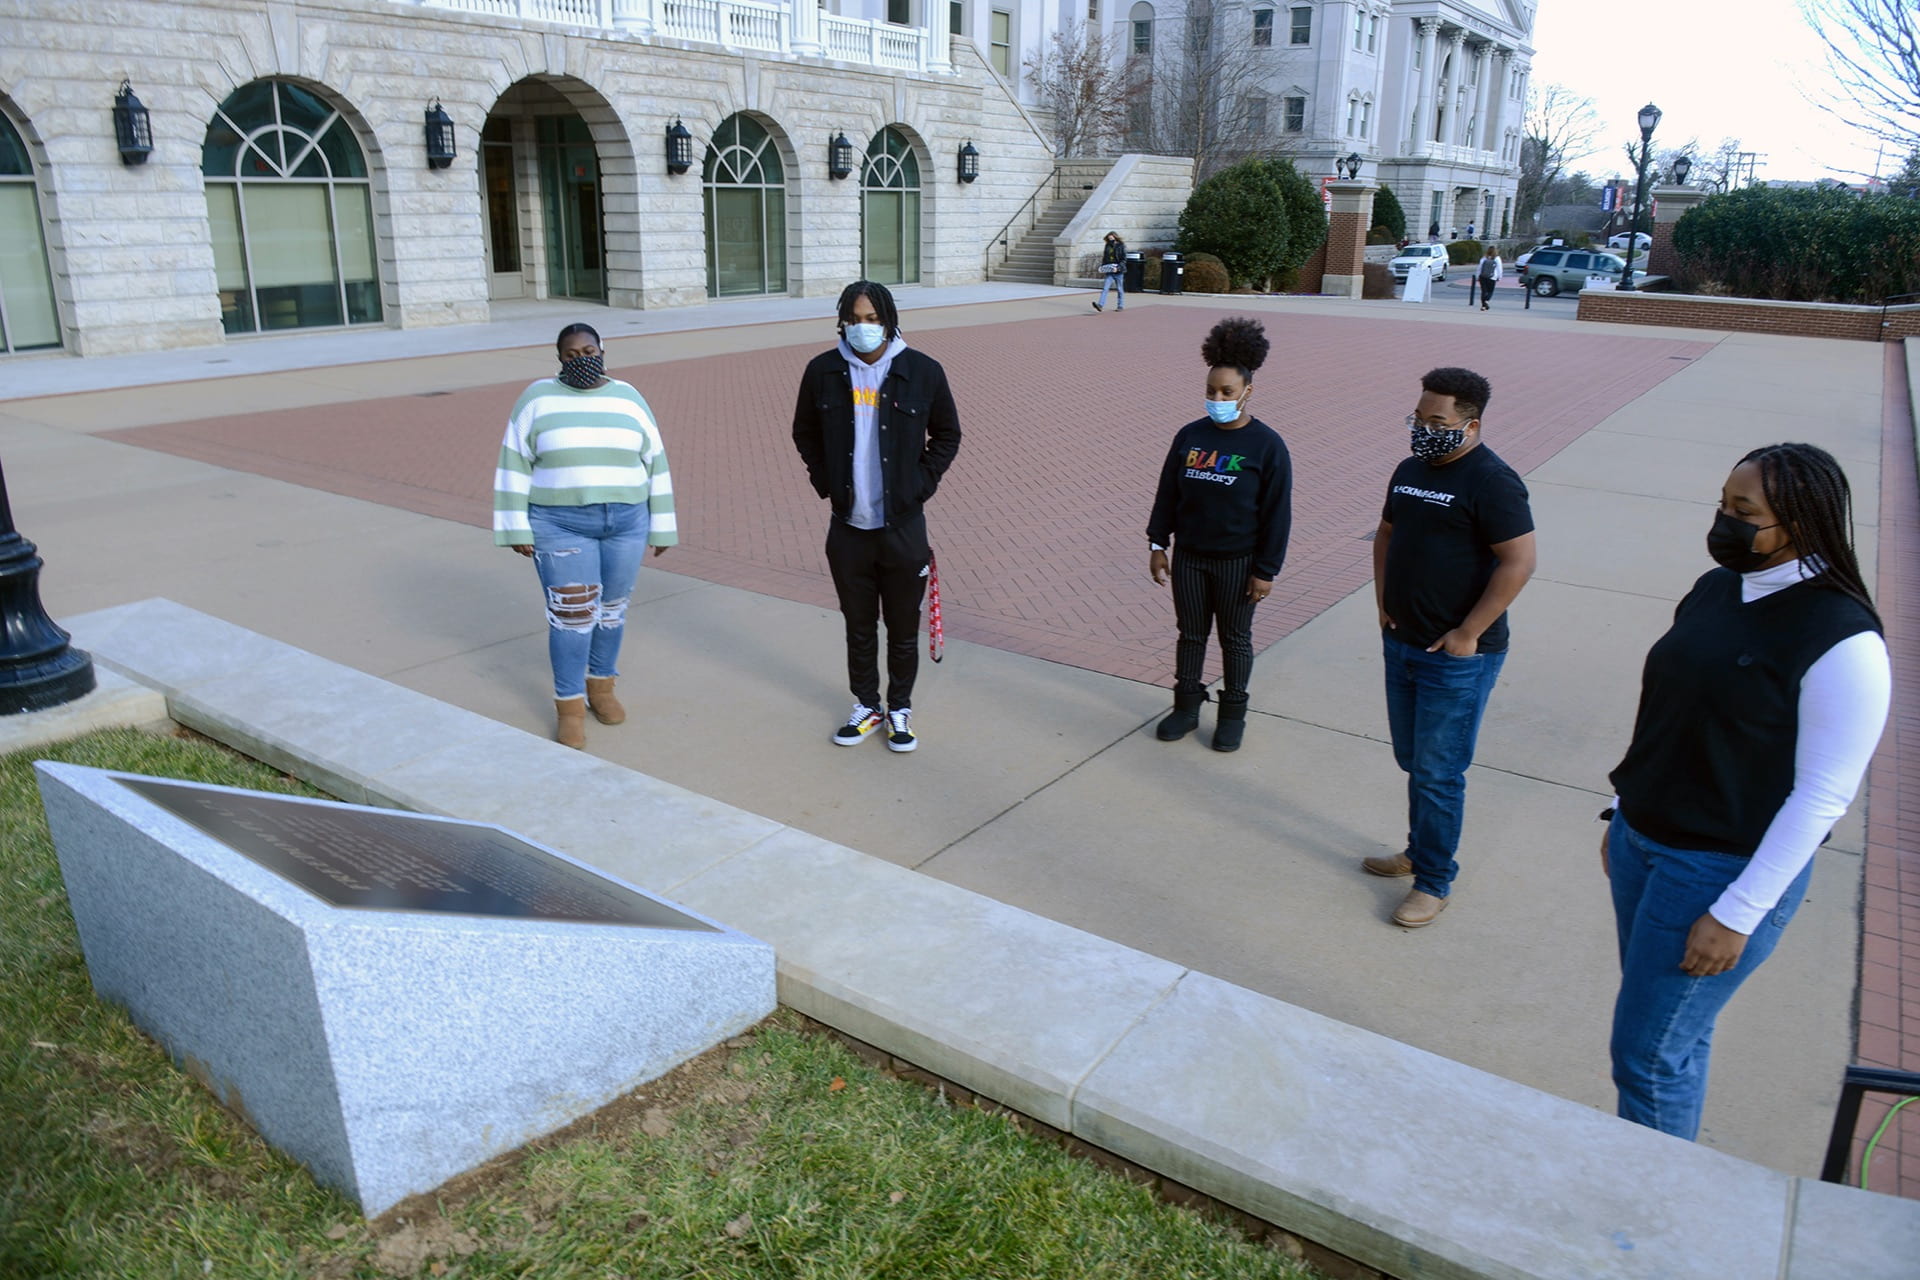 Black Student Association (BSA) Antionedra Maupin, Gilbert Dozier, Haily McGee, Marcus Knight and Jazmyn Pickstock pose for a picture in the newly unveiled Freedom Plaza at Belmont University in Nashville, Tennessee, January 18, 2021. Freedom Plaza was a announcement this morning in celebration of MLK day.